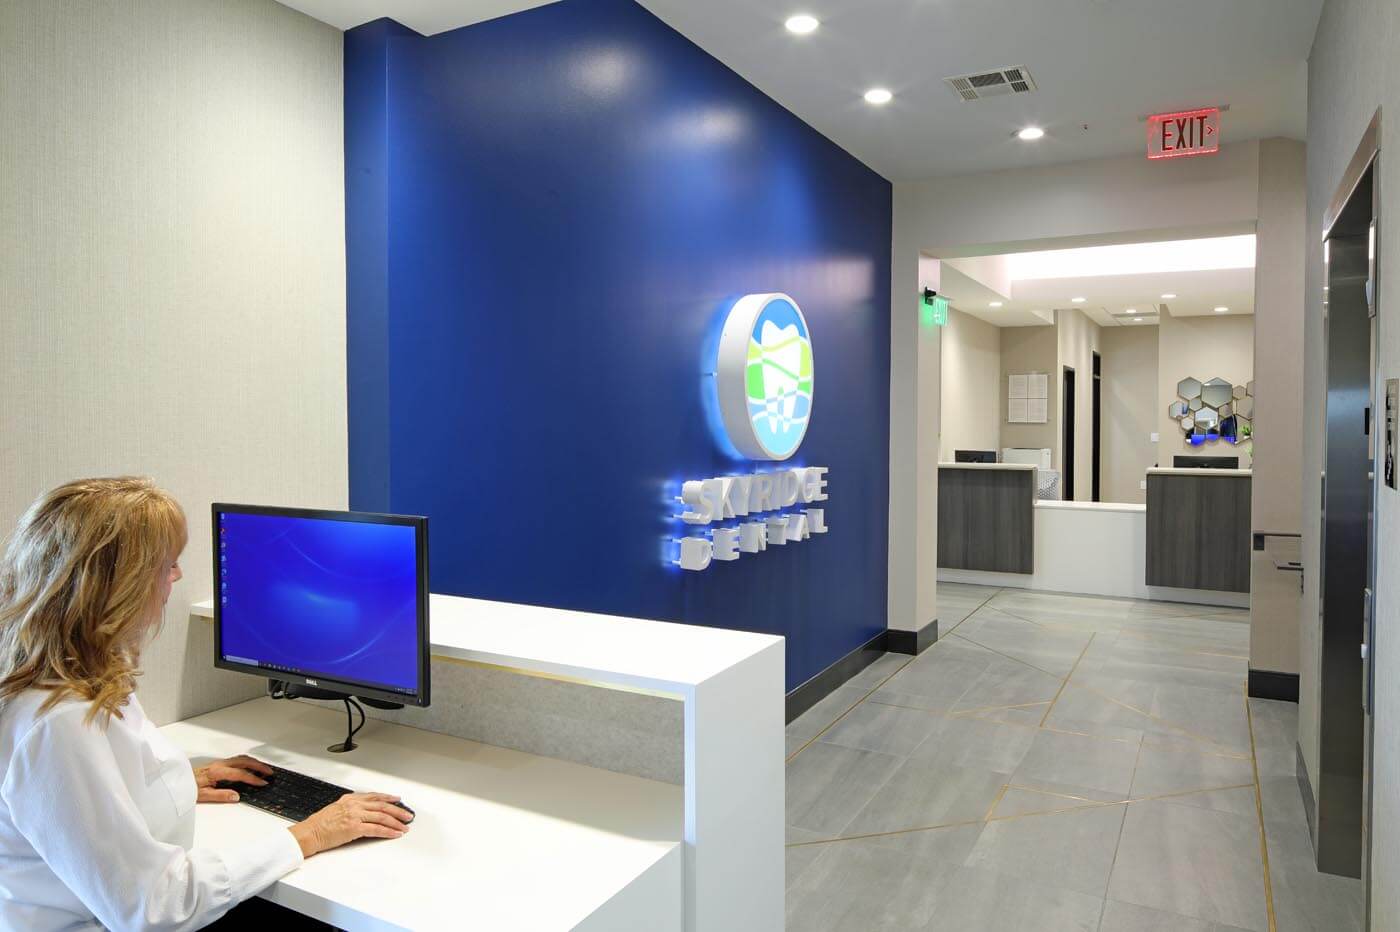 A staff member at work in the SkyRidge dental office, which is clean, modern, and sleek. At the end of the hall the reception desk can be seen.